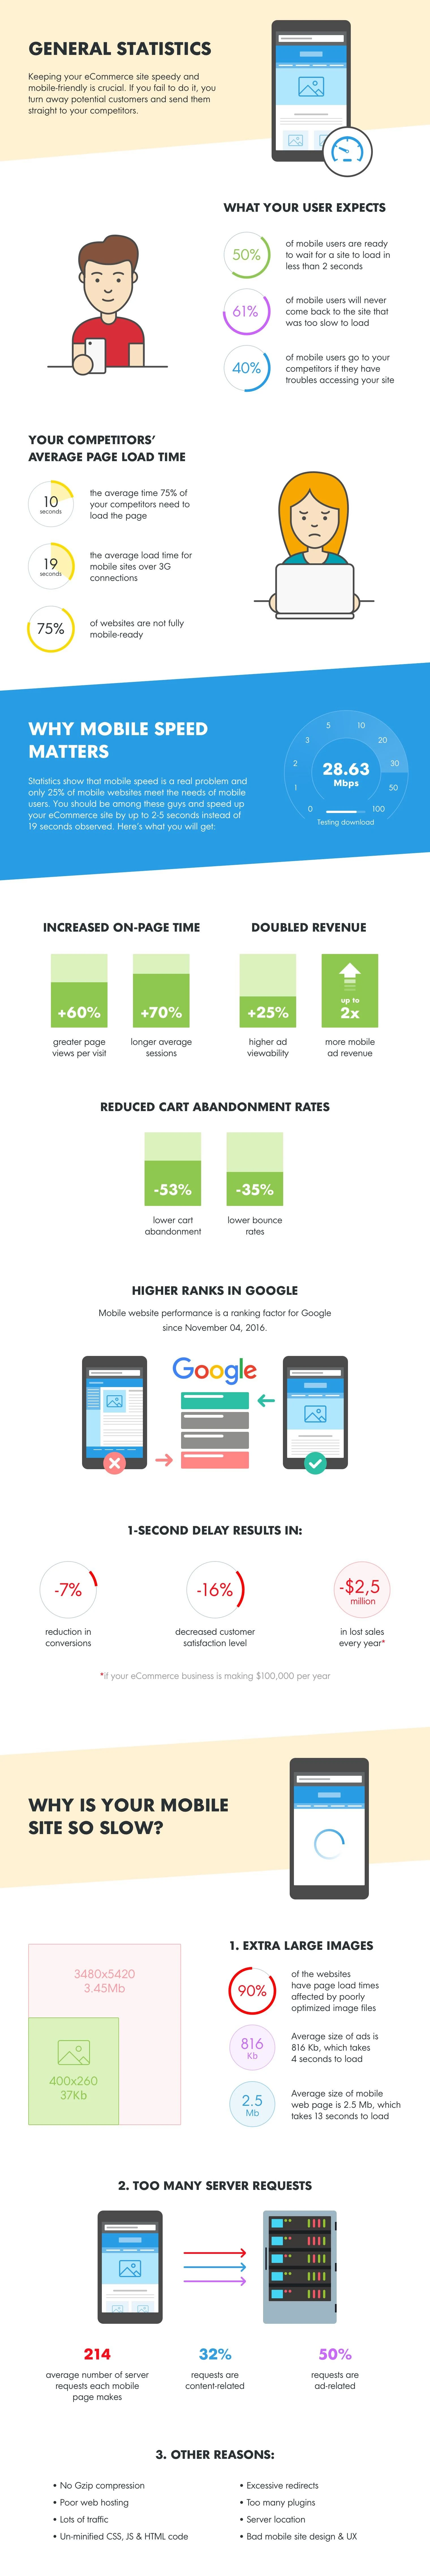 How To Speed Up Mobile Website Performance - #Infographic